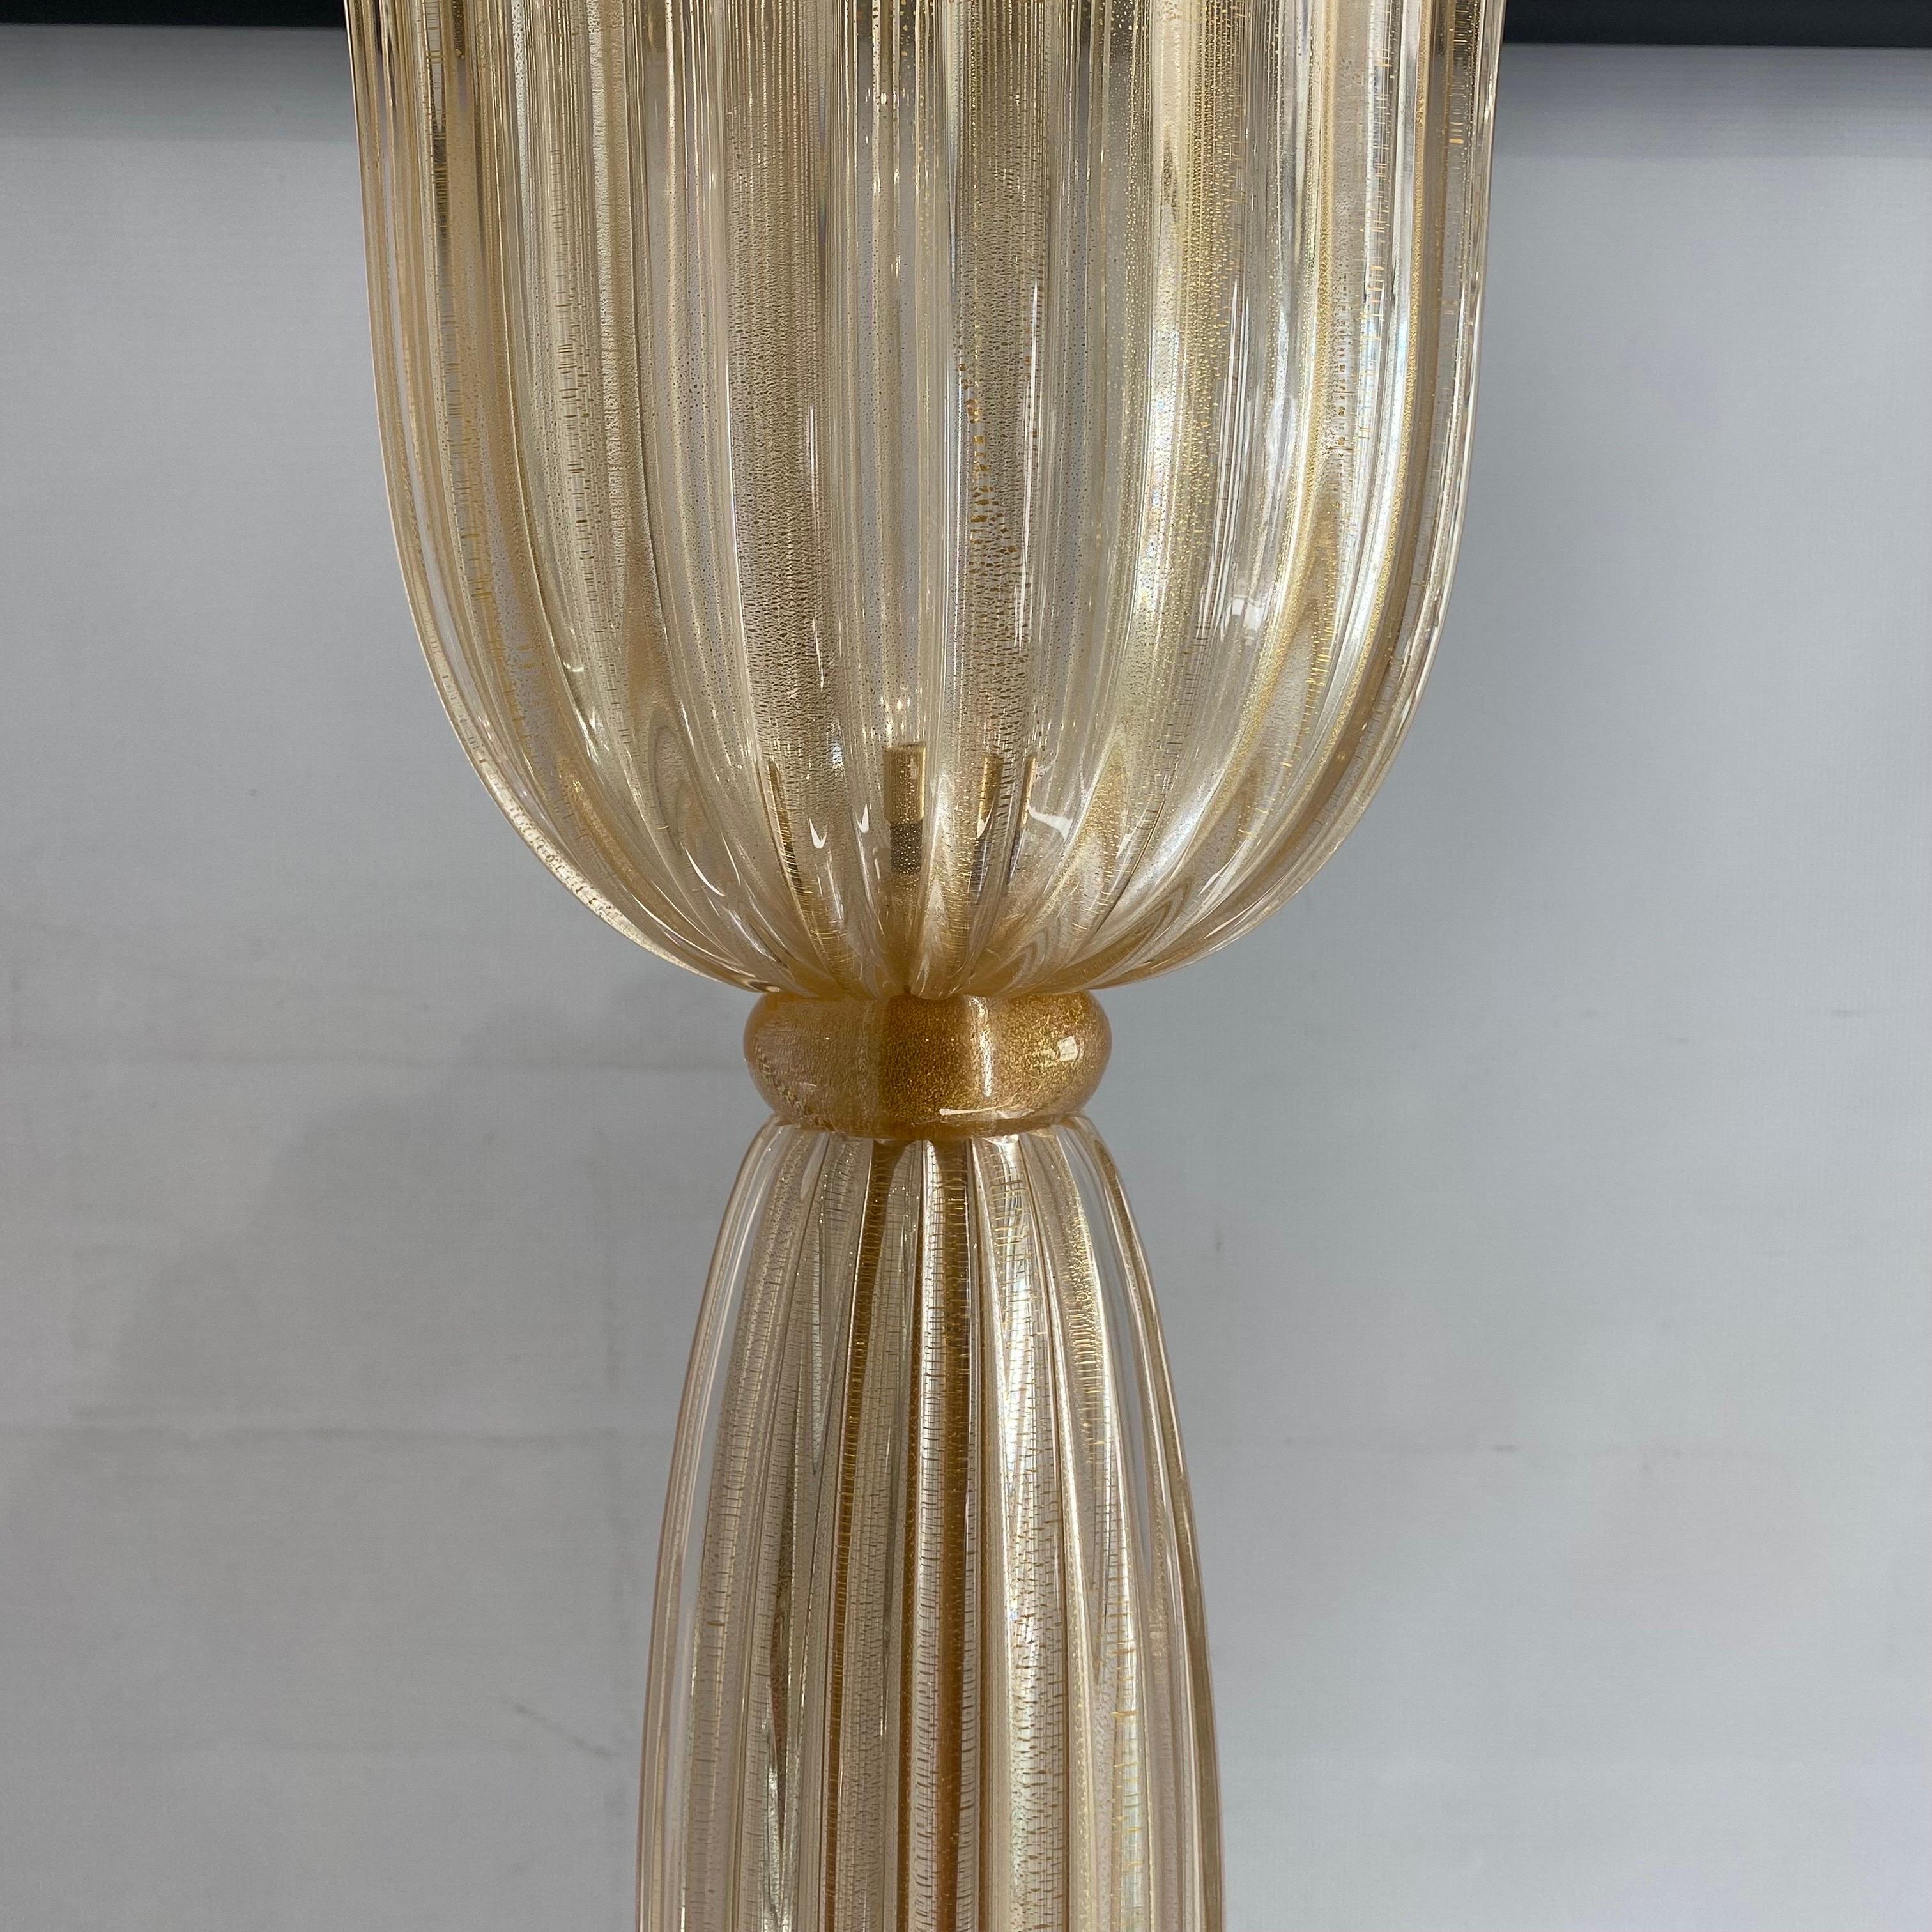 Signed Archimede Seguso Murano Glass Floor Lamp Gold Italian Art Deco 1980s In Good Condition For Sale In London, GB